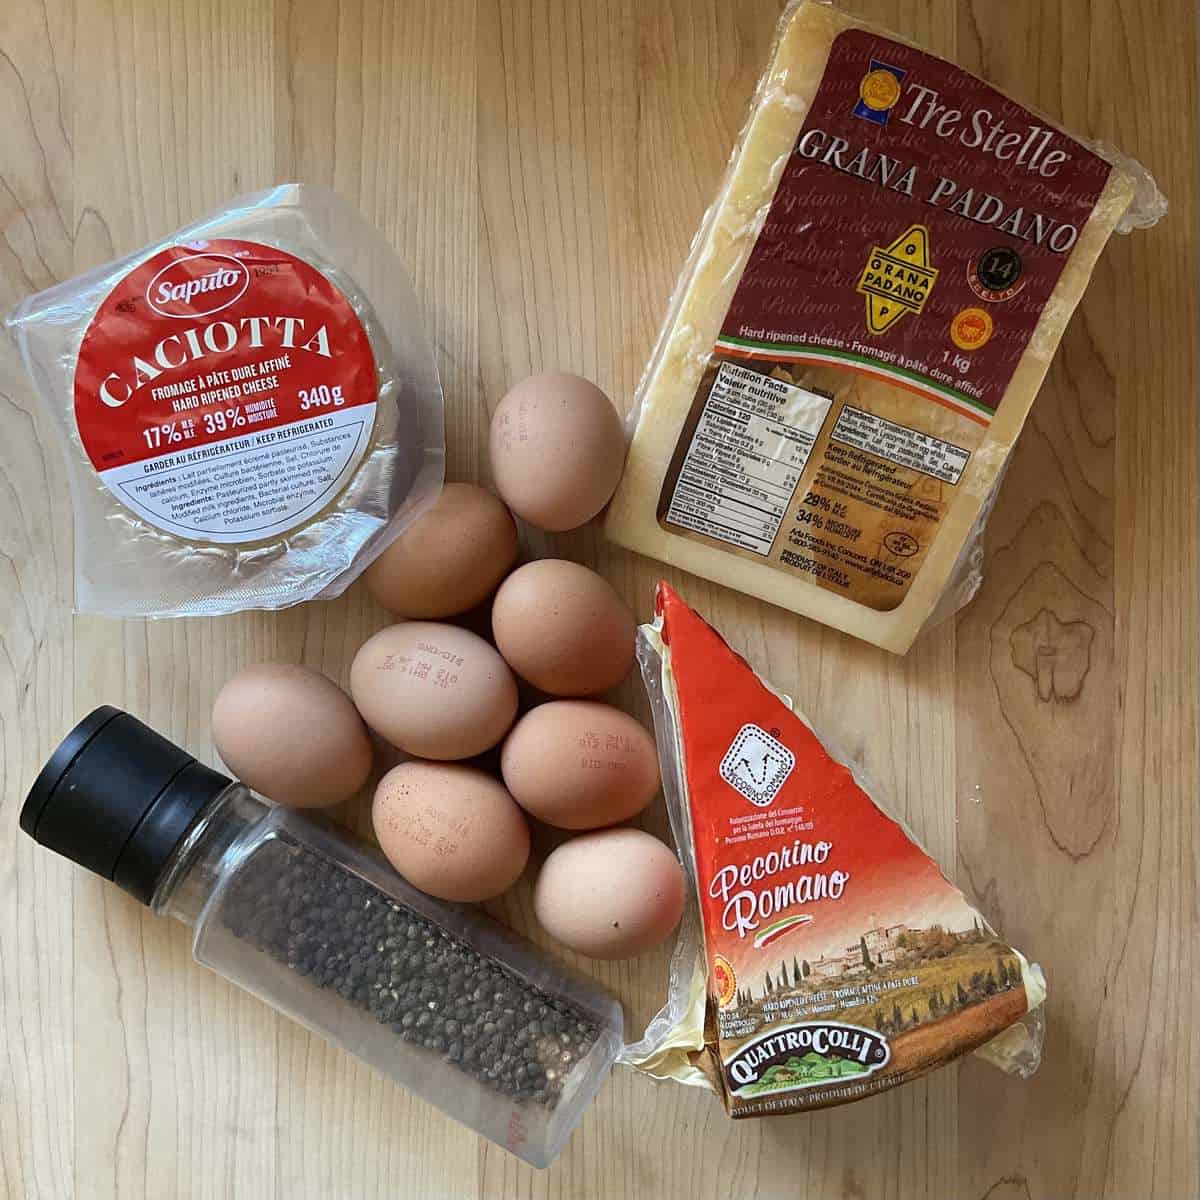 Ingredients to make the cheese filling for the savory Italian cheese pie.